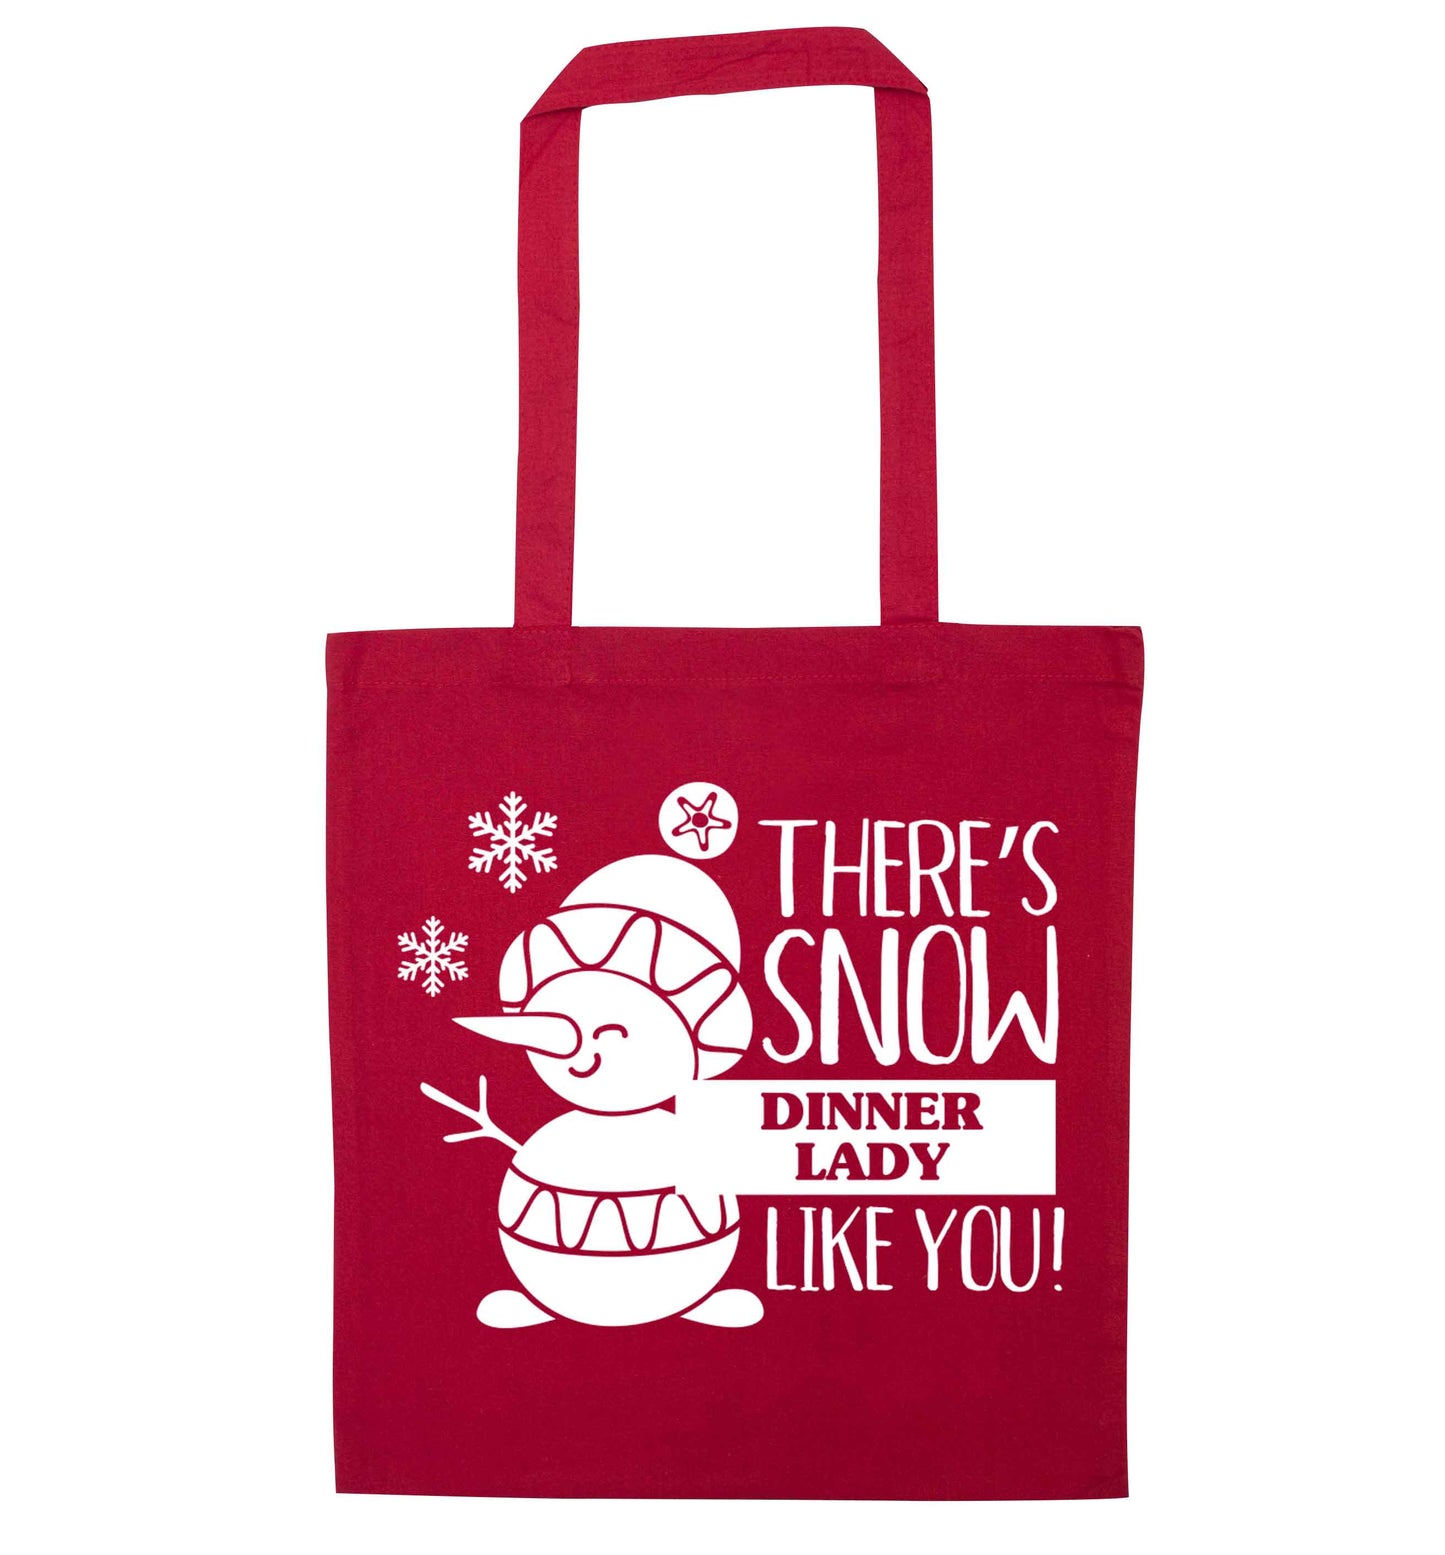 There's snow dinner lady like you red tote bag